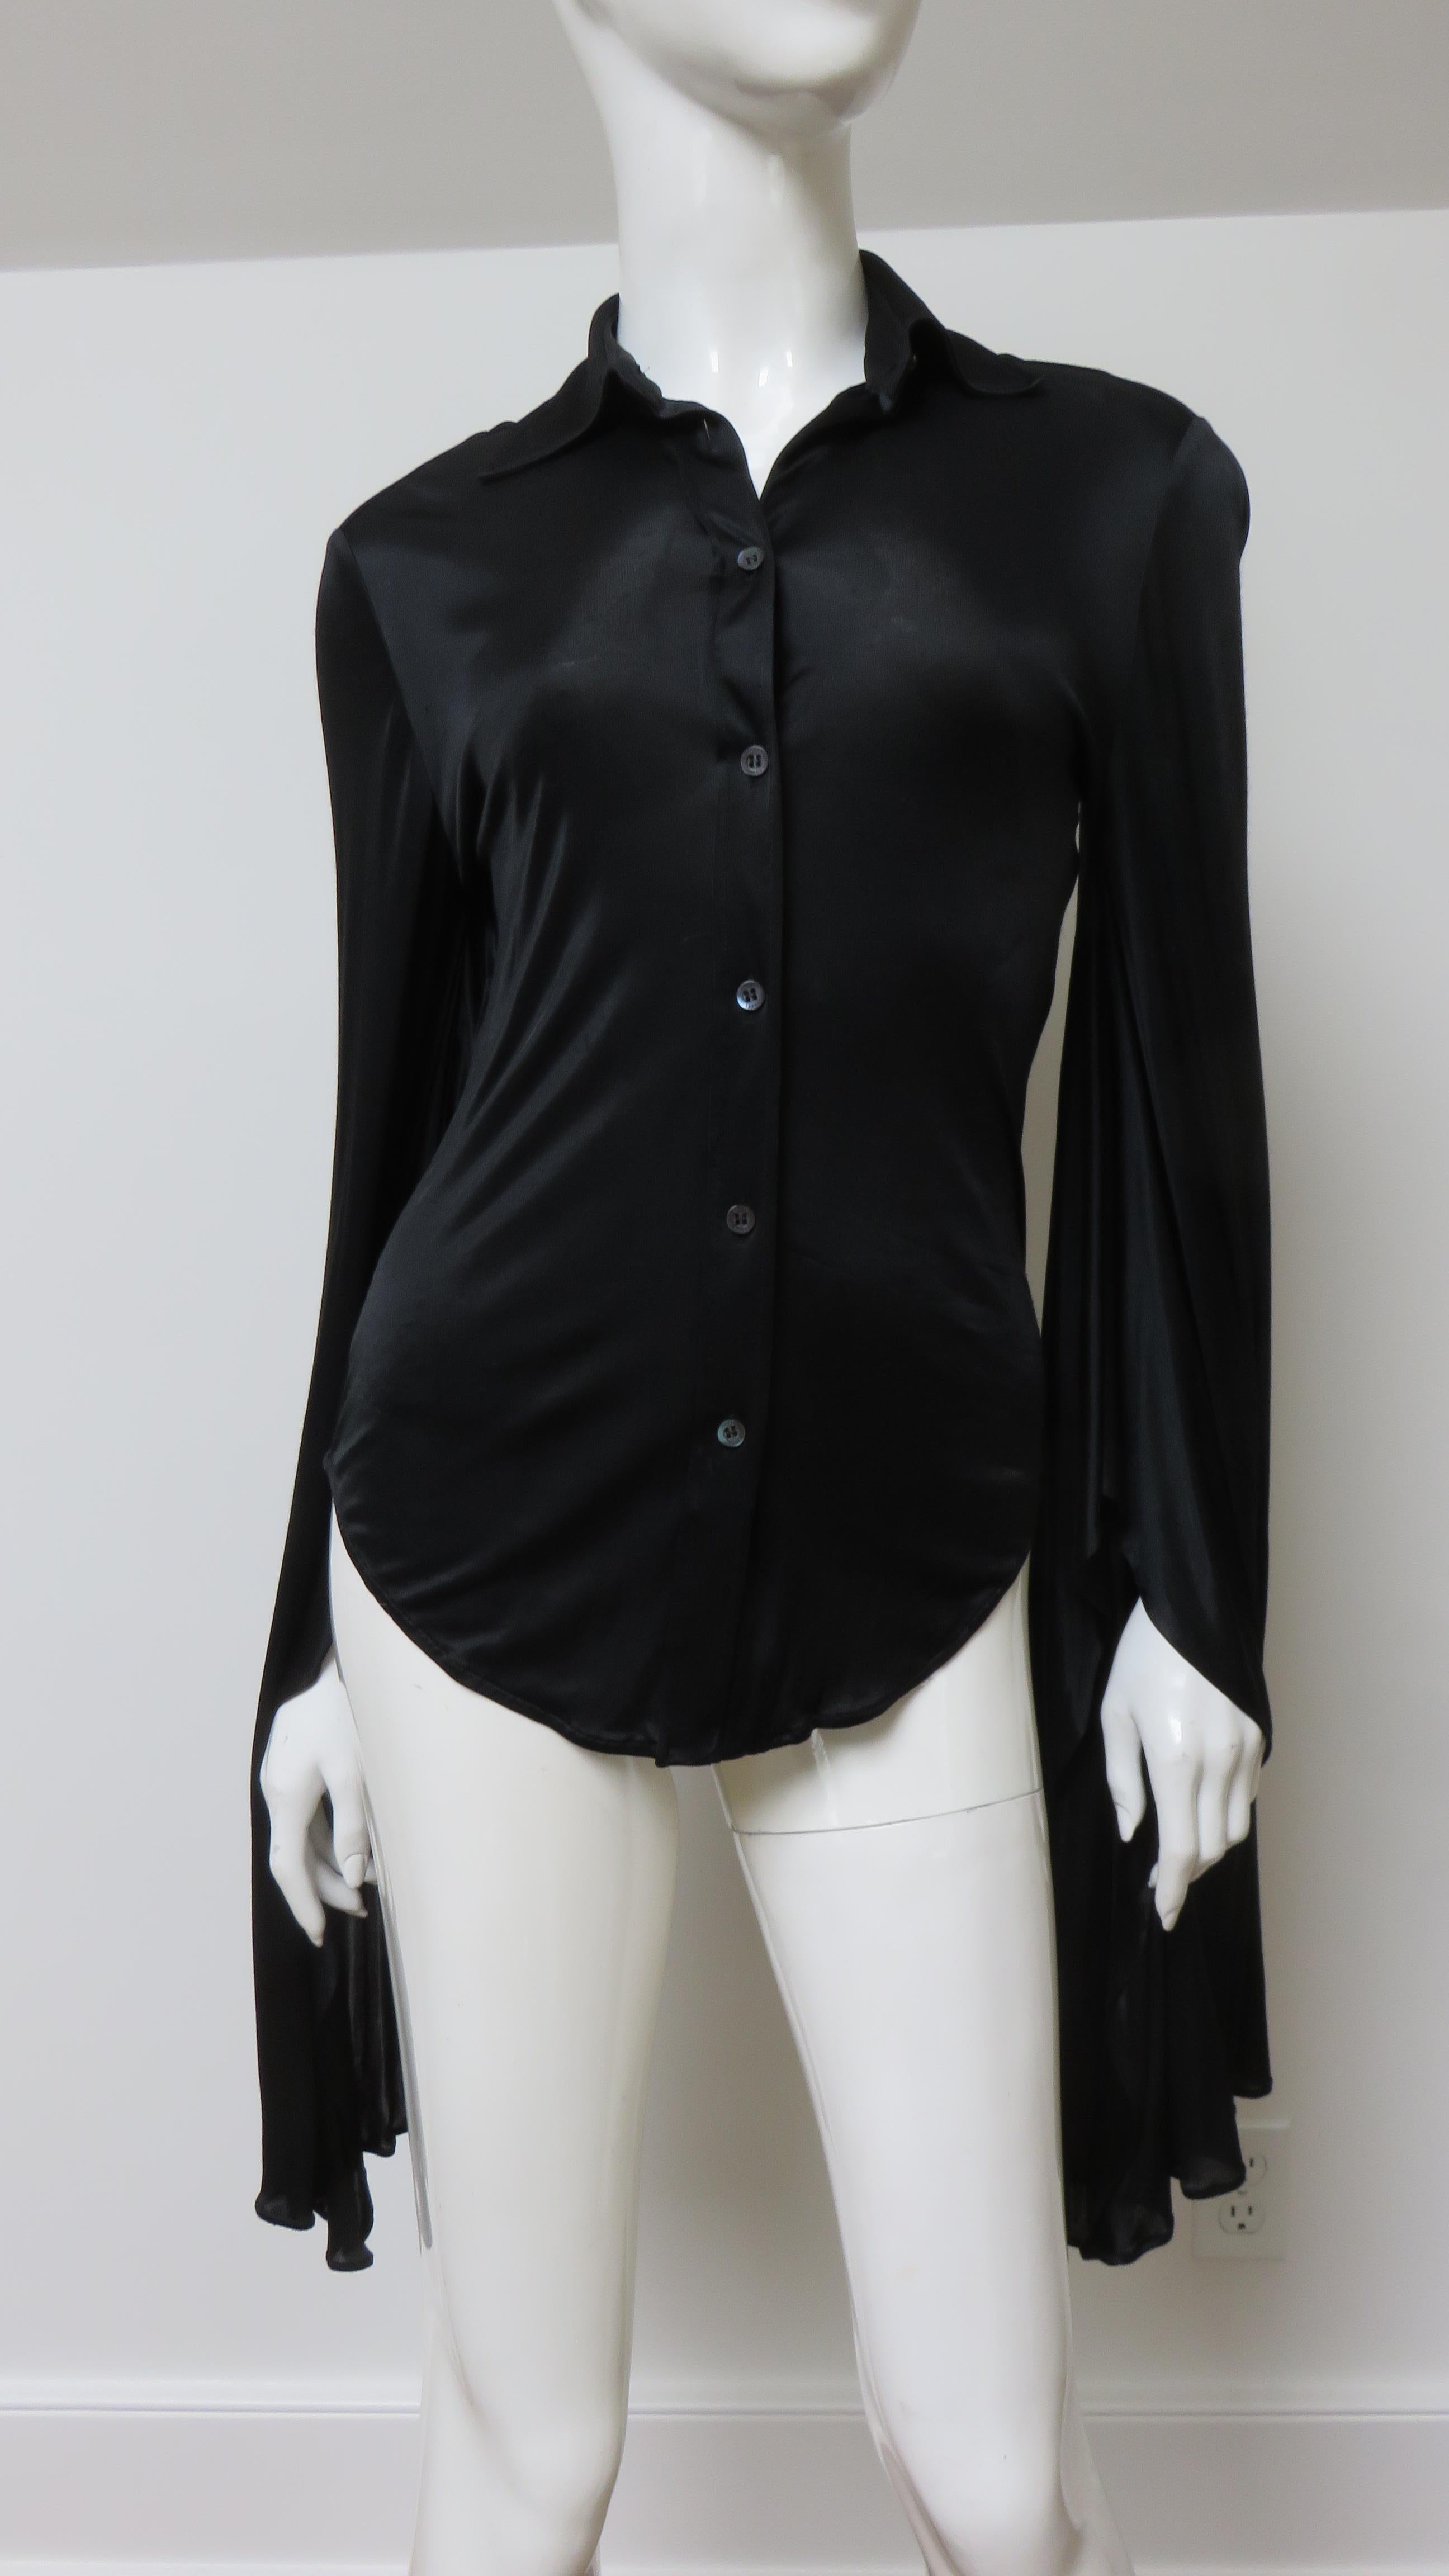 A fabulous black fine stretch silk shirt, top, blouse from Tom Ford for Gucci.  It is semi fitted with a shirt collar, black mother of pearl Gucci inscribed button up the front and great long draping angel sleeves.
Fit sizes Extra Small, Small.